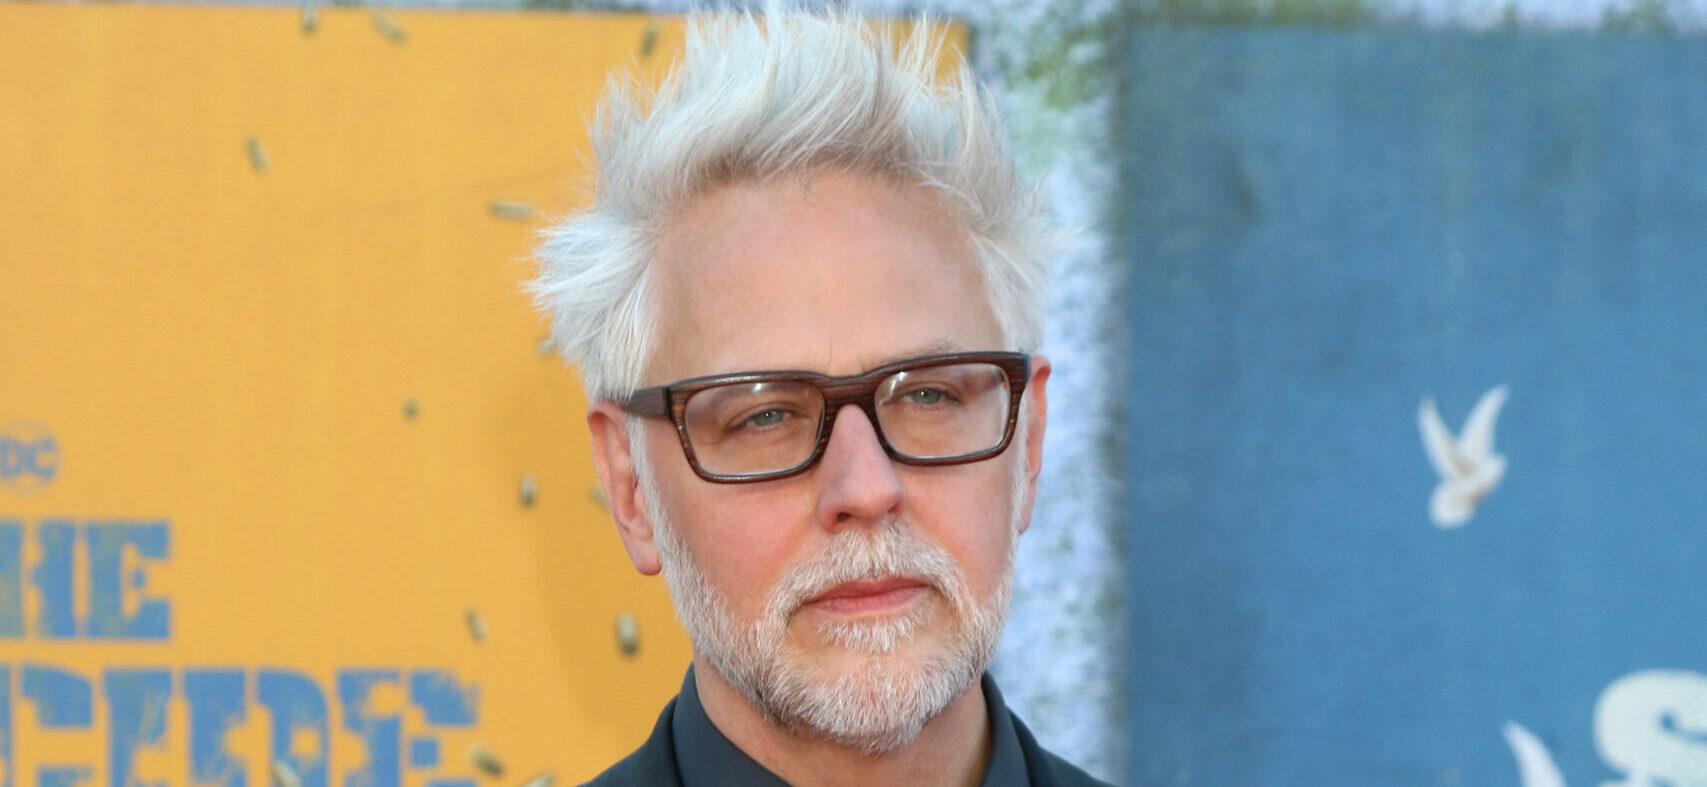 James Gunn at the The Suicide Squad Premiere